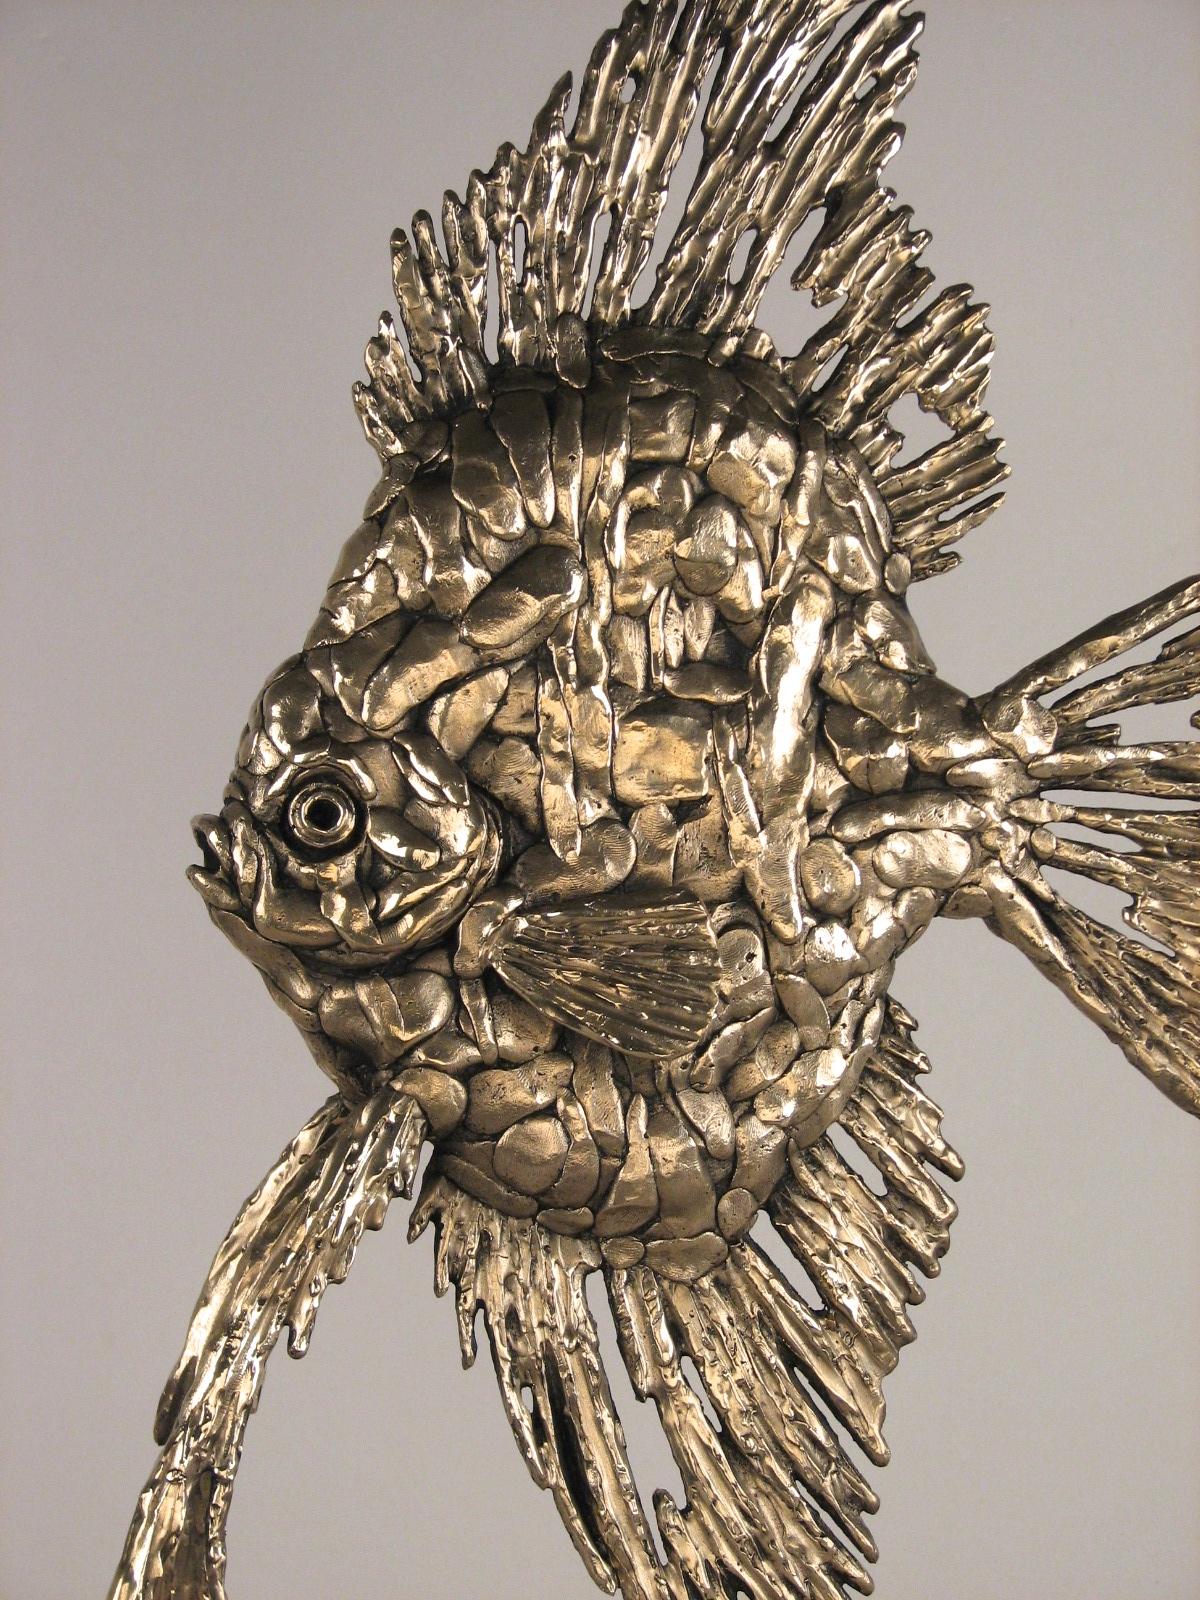 Angel Fish-original abstract wildlife bronze sculpture for sale-contemporary Art - Sculpture by Andrzej Szymczyk